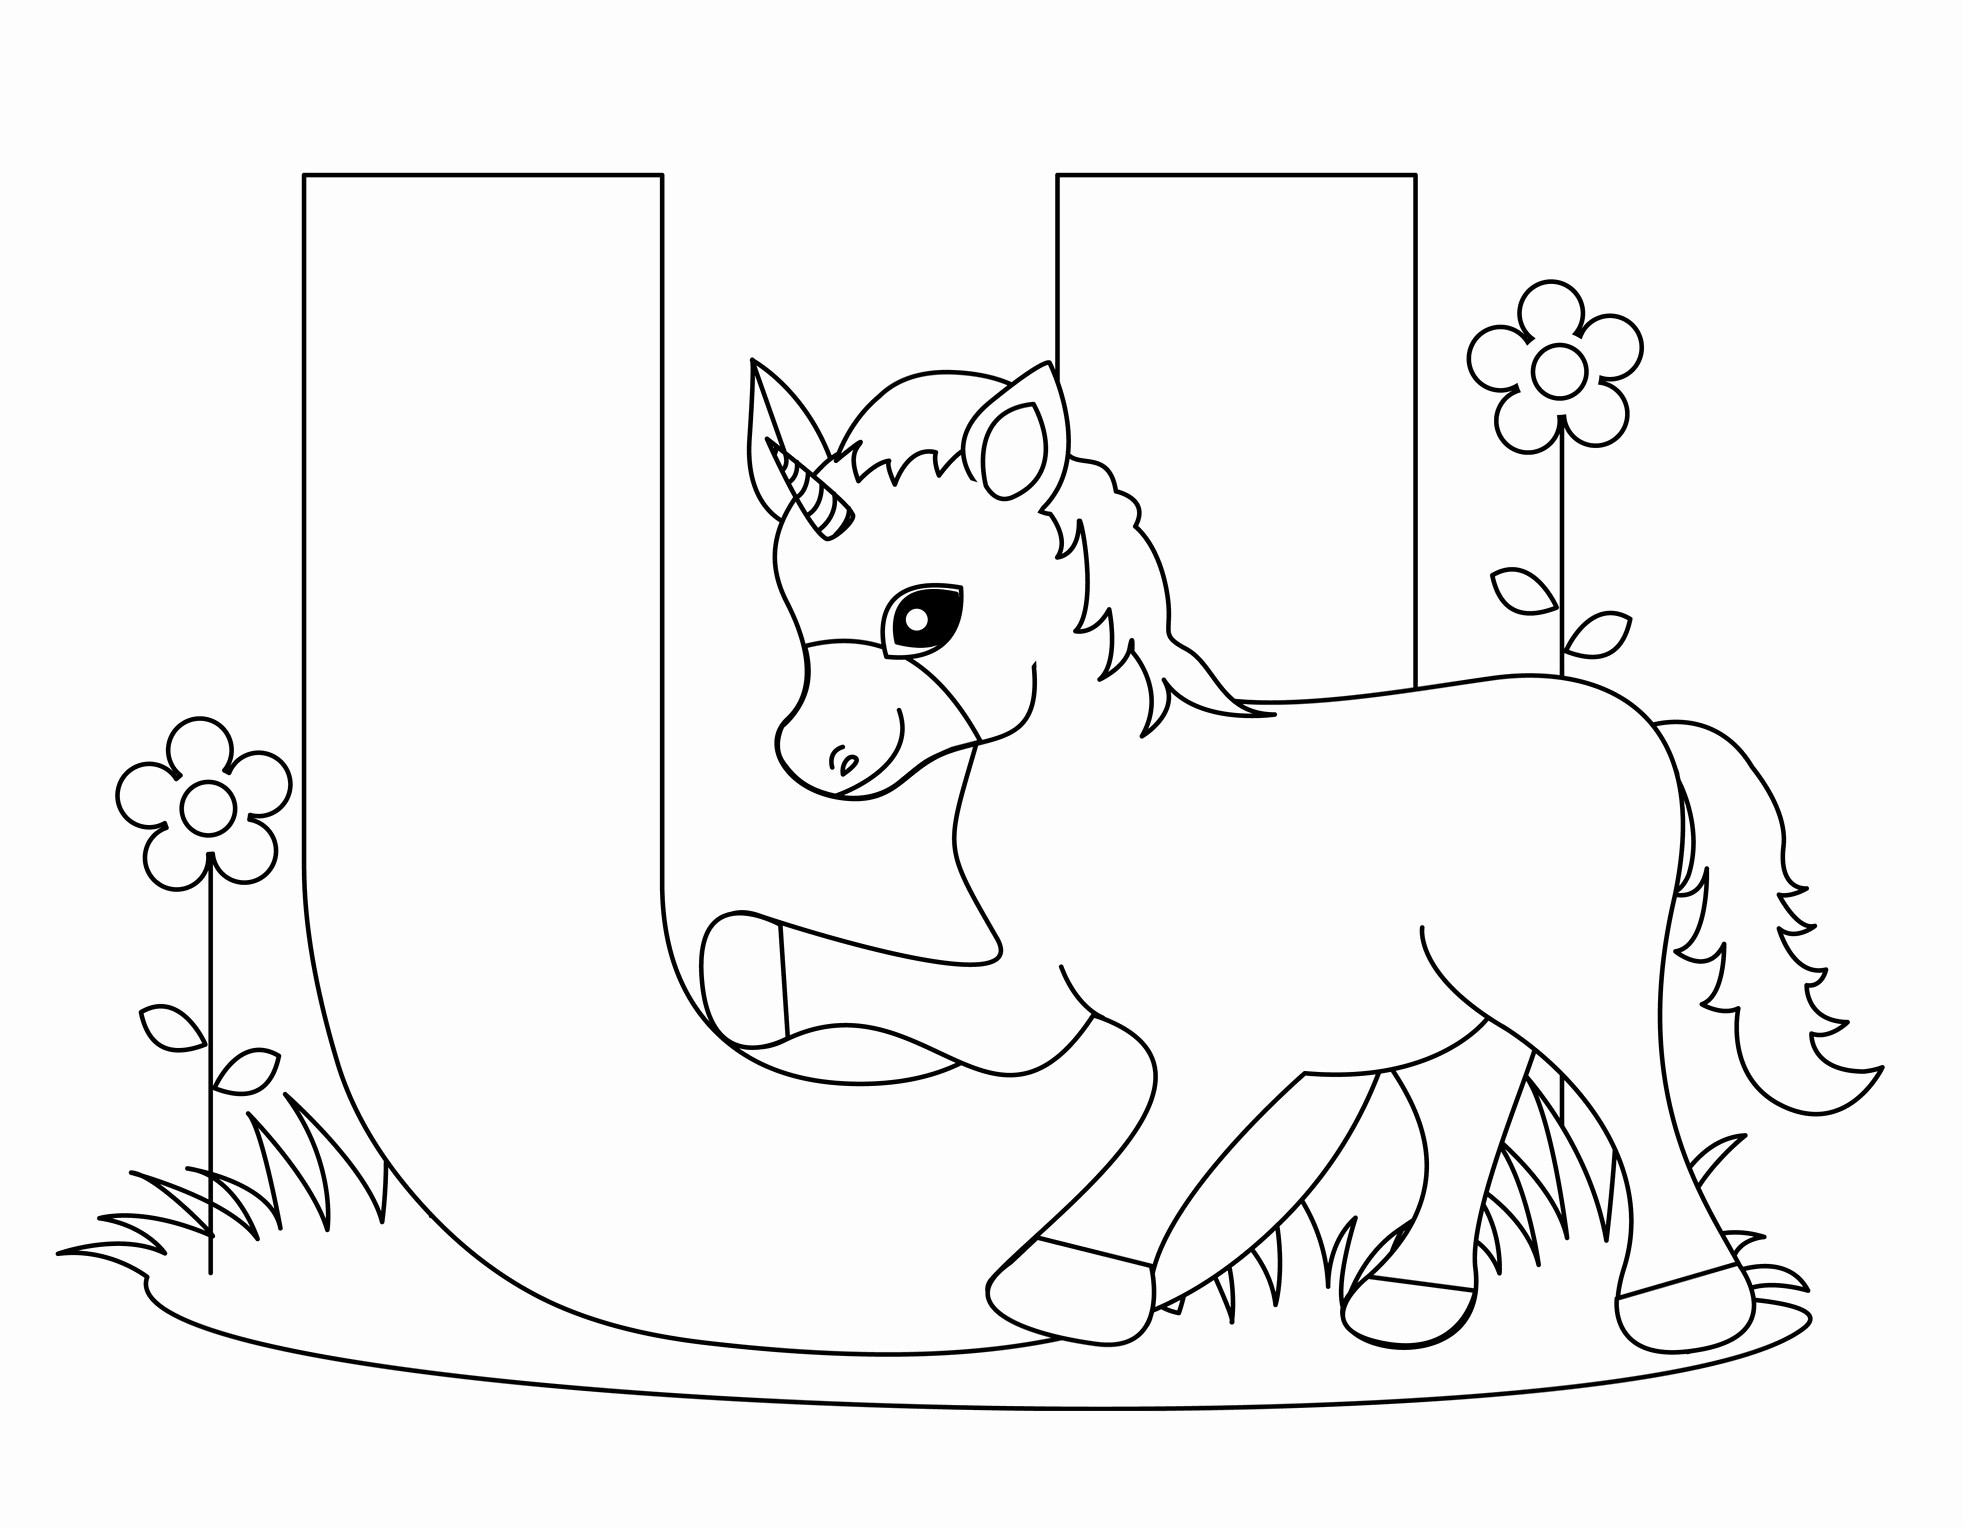 Printable Alphabet Coloring Pages | Popisgrzegorz - Free Printable Alphabet Coloring Pages